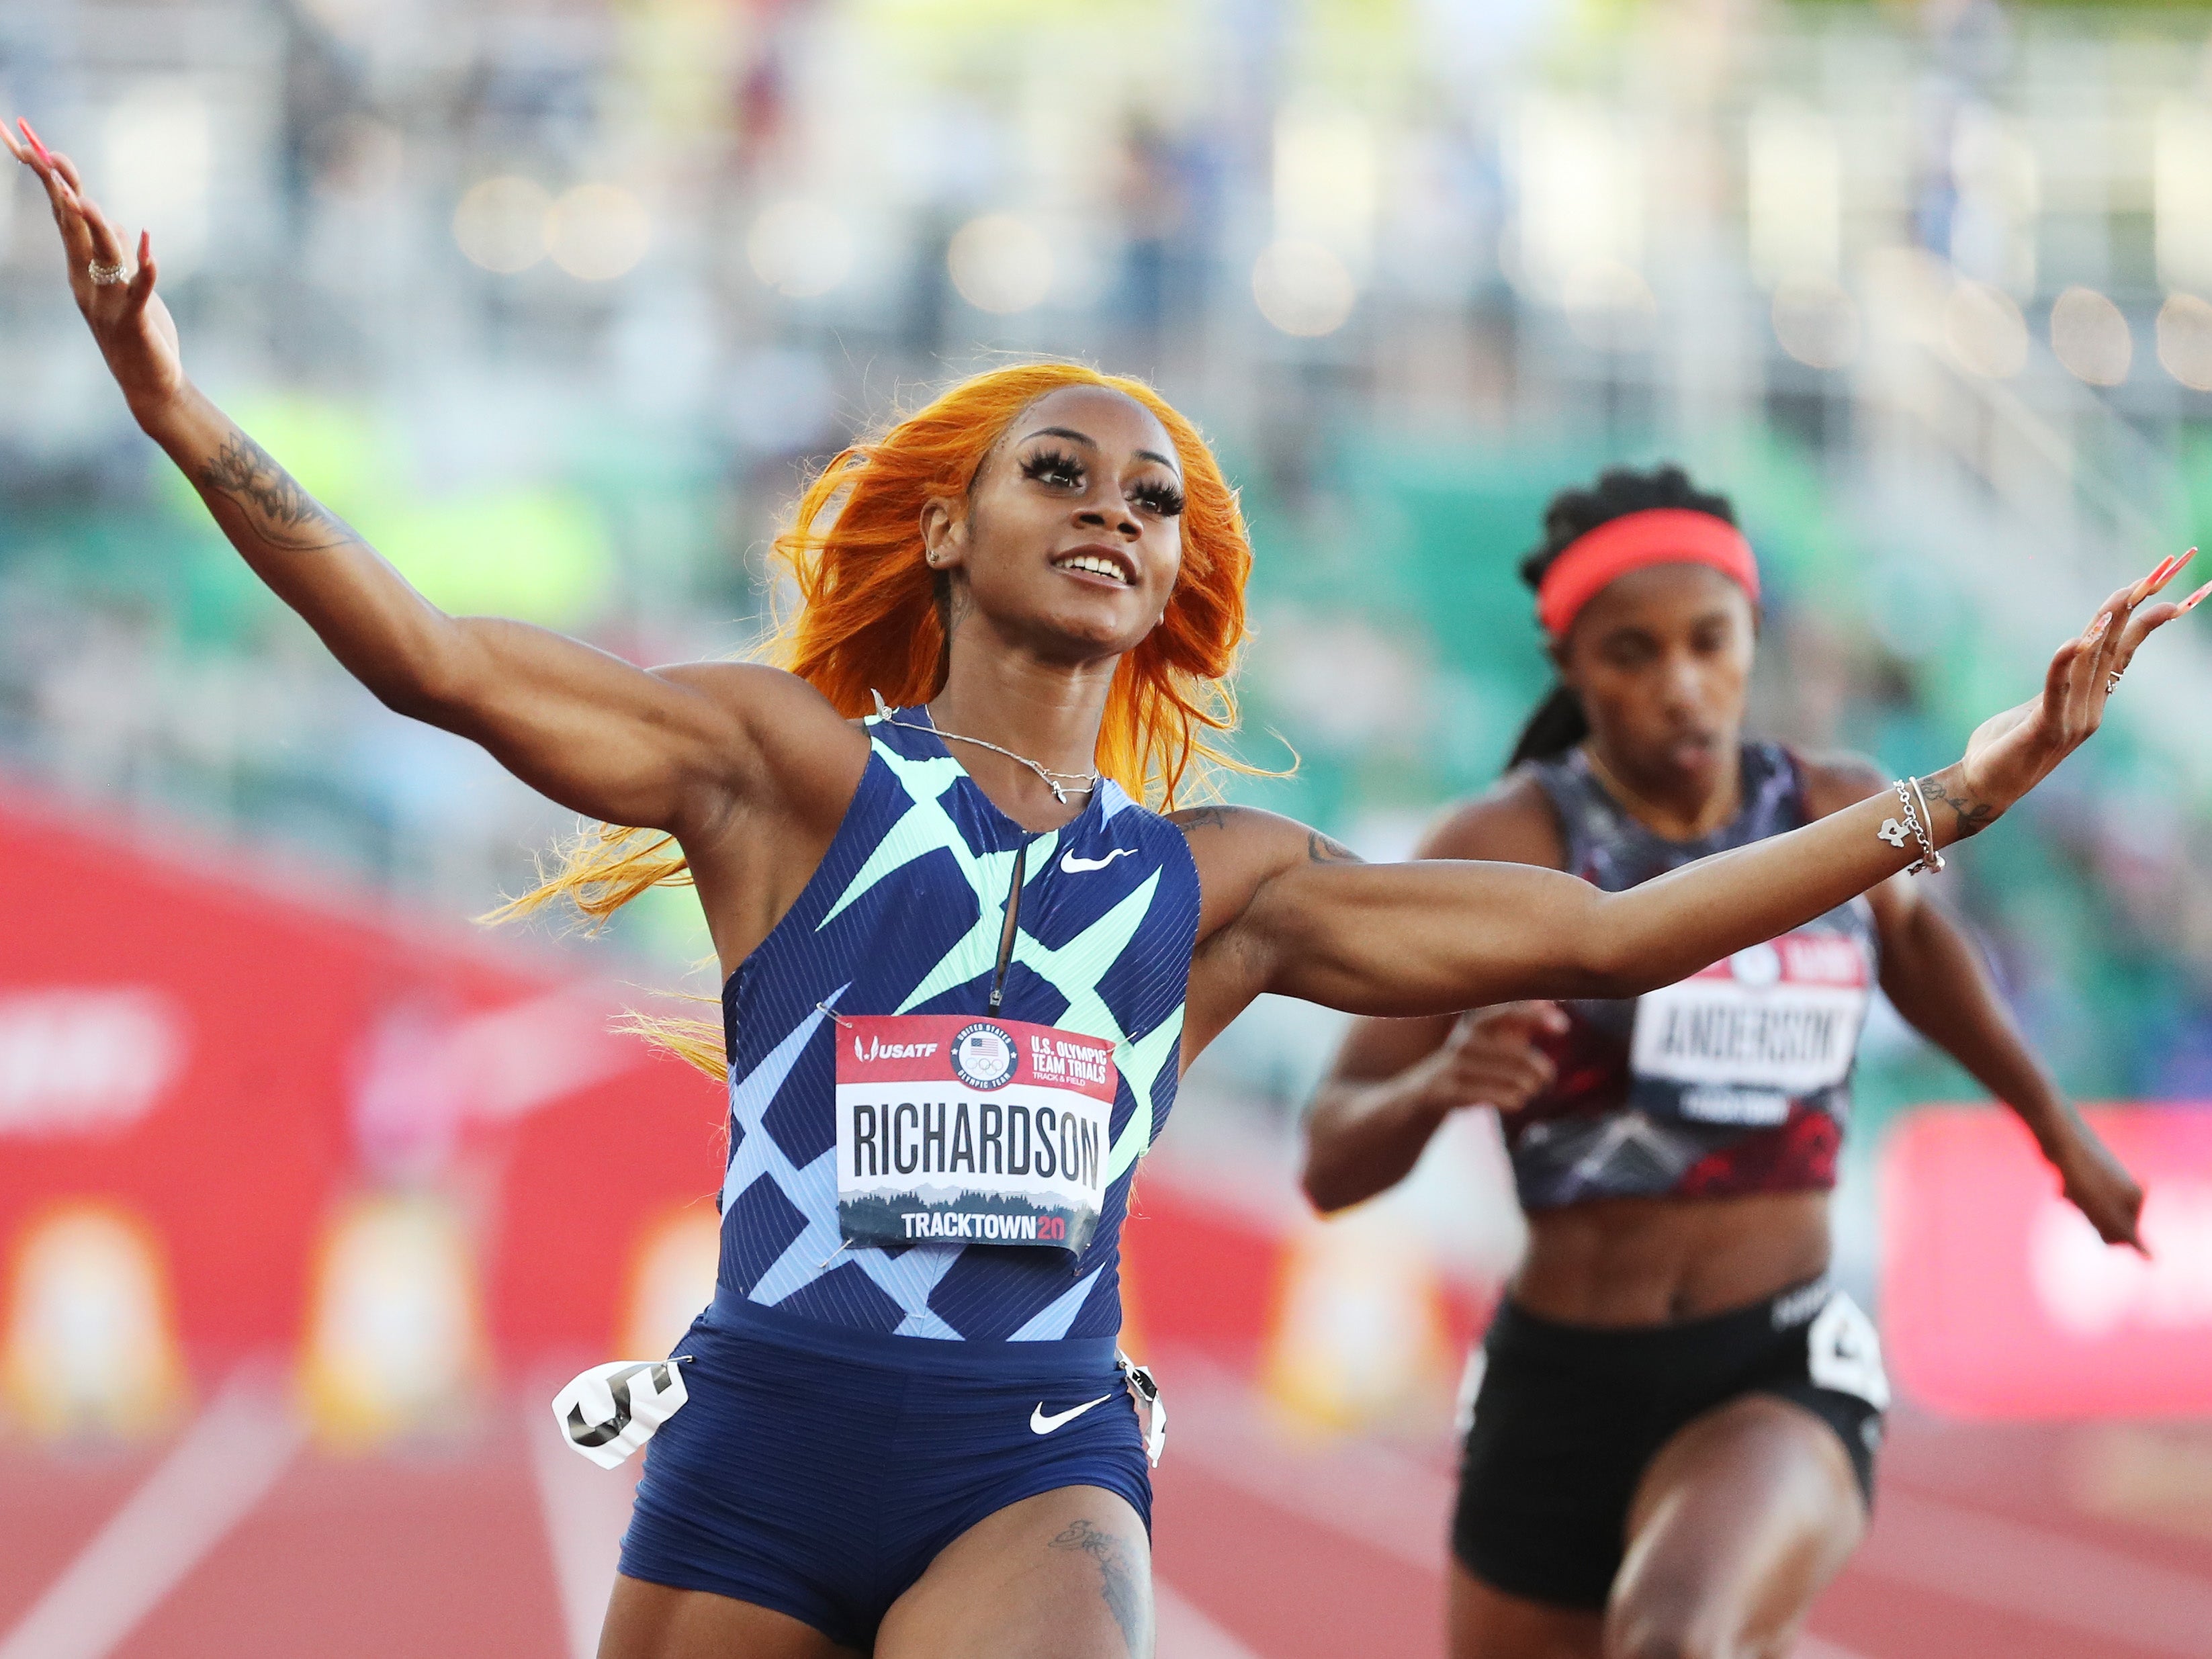 US sprinter Sha’Carri Richardson won’t be competing in the Tokyo Olympics, after being left off the roster following a positive test for marijuana.